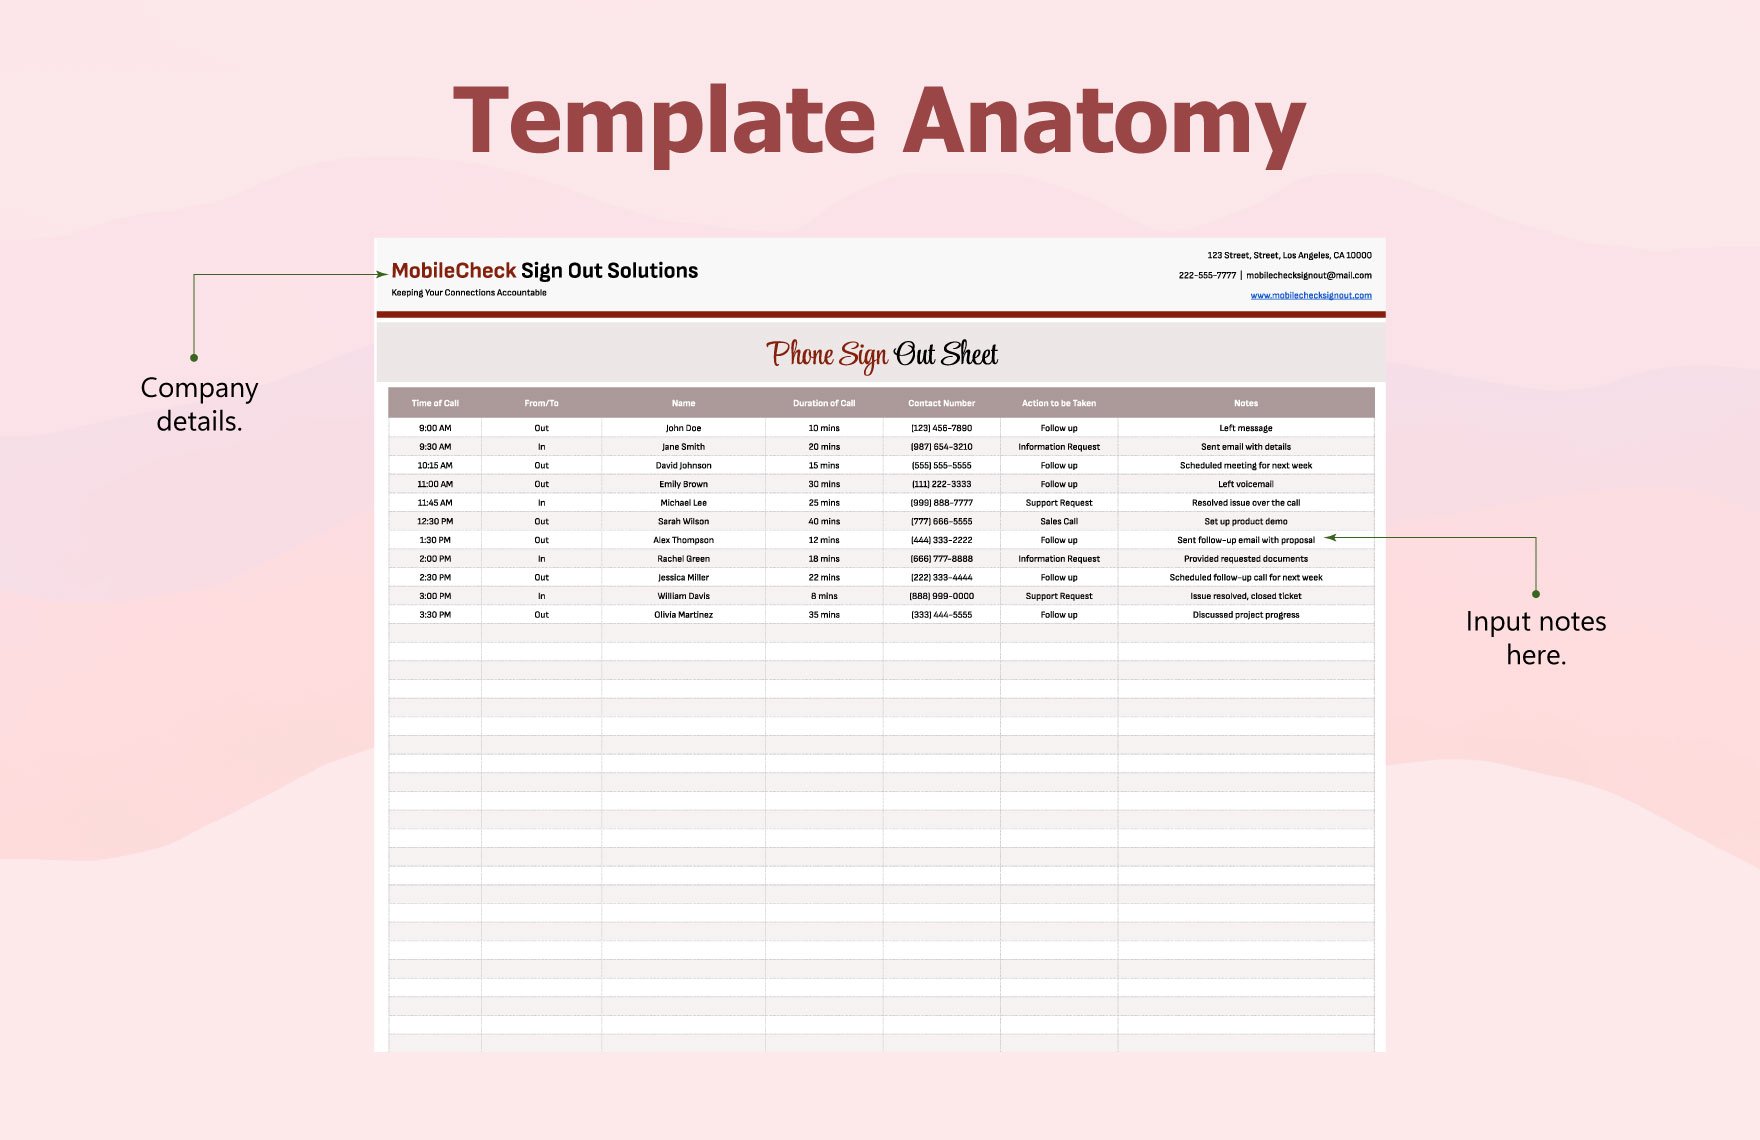 Phone Sign Out Sheet Template